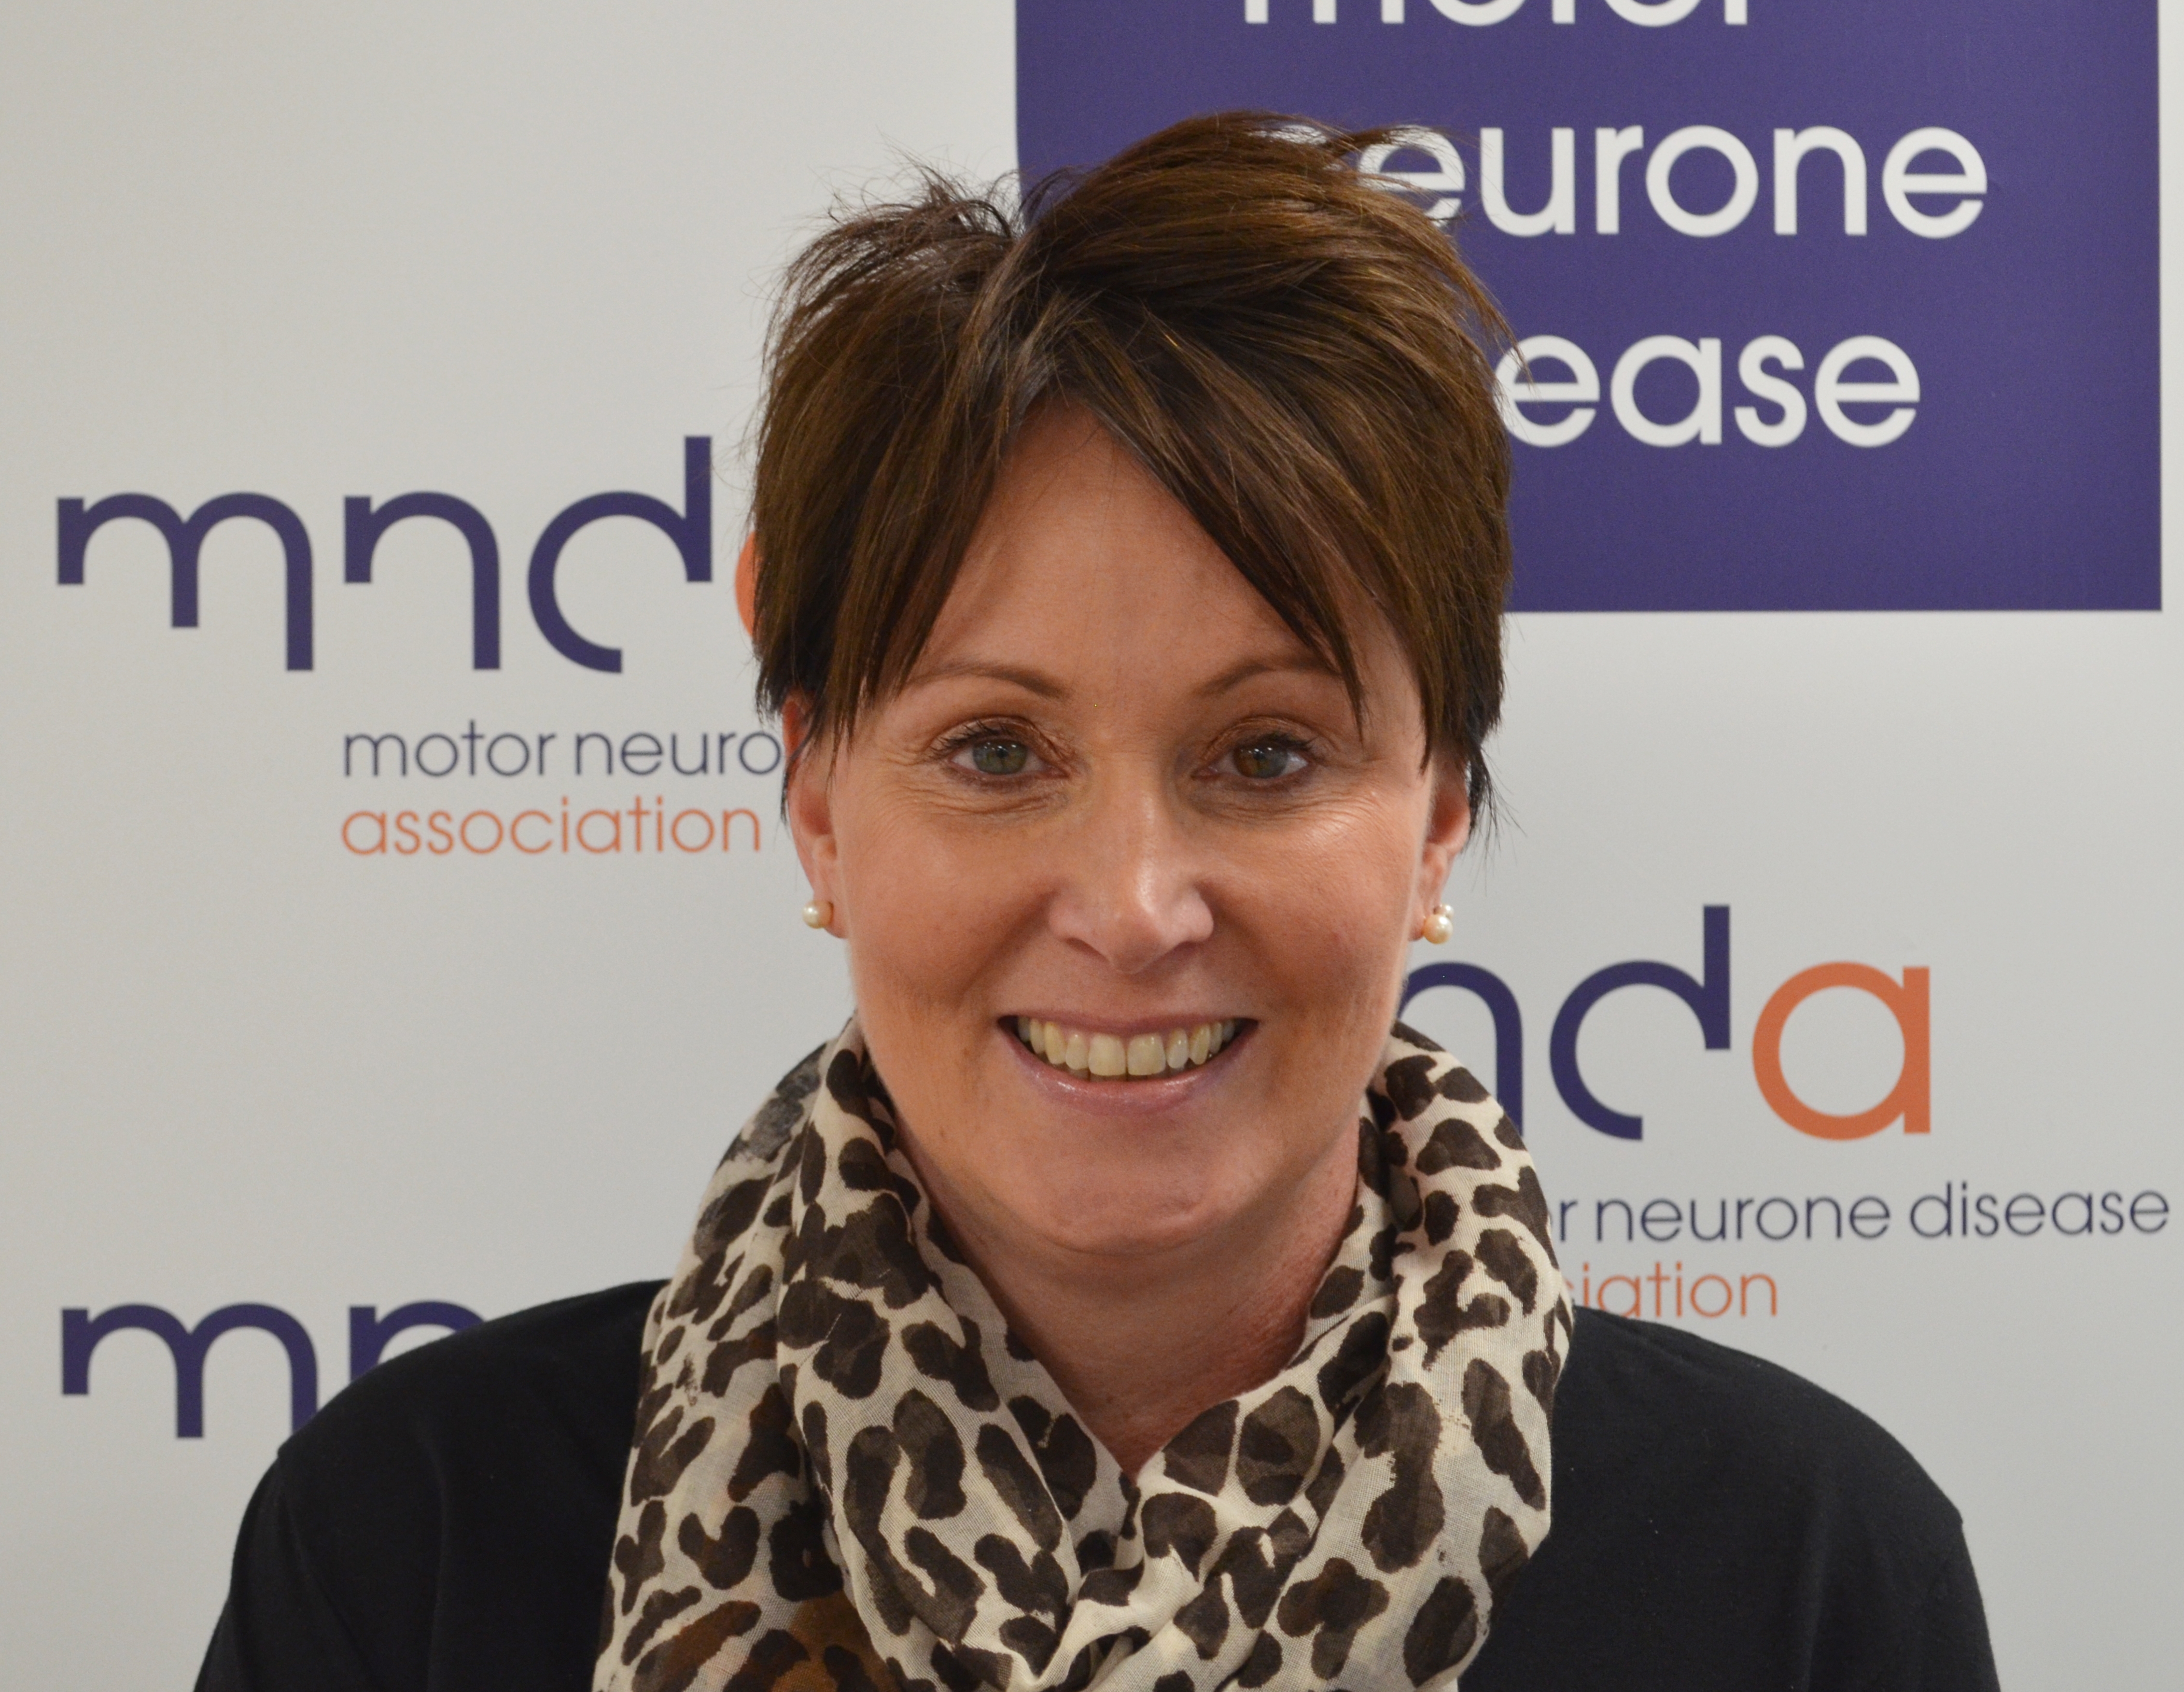 A headshot of Tanya Curry, CEO of the MND Association. 